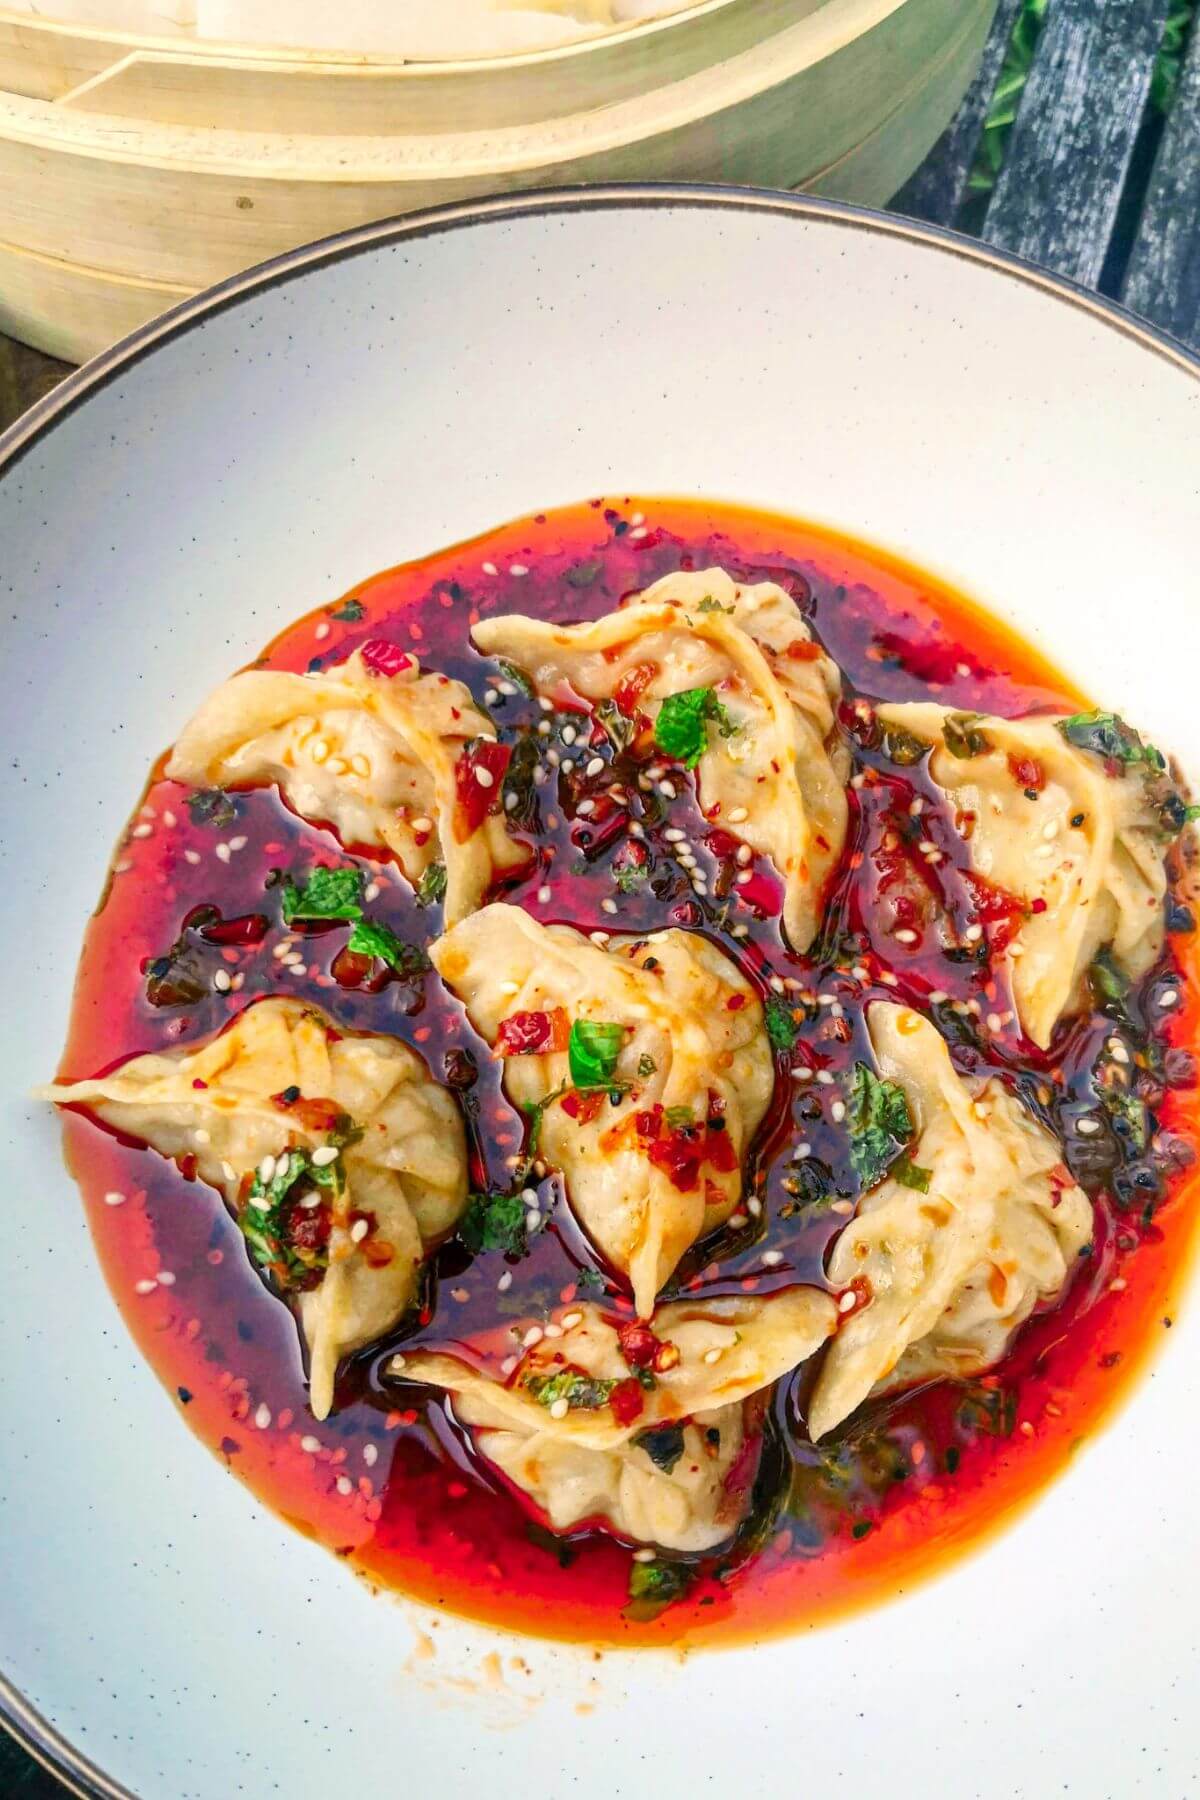 Dumplings in a bowl with red dipping sauce.